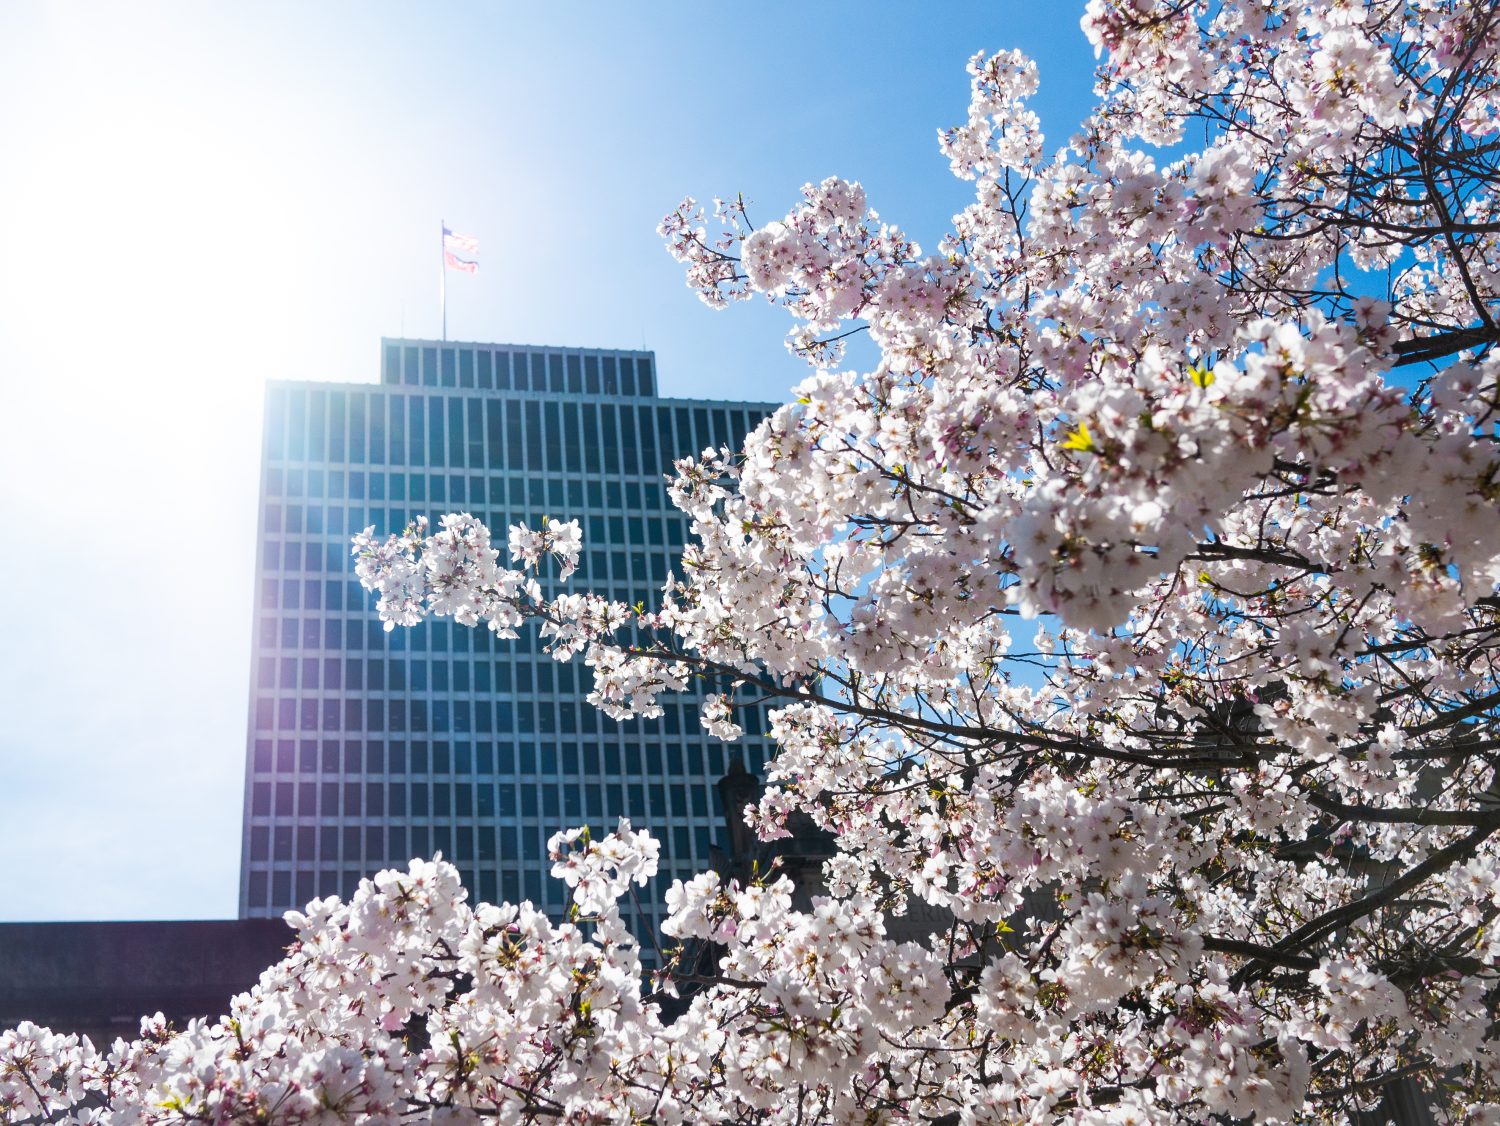 <p>From 2009 to 2019, around 1,000 cherry blossom trees were planted in Nashville. Every spring, the white and pink flowers bloom offering beautiful displays across the city.</p><p>Sharks, lions, alligators, and more! Don’t miss today’s latest and most exciting animal news. <strong><a href="https://www.msn.com/en-us/channel/source/AZ%20Animals%20US/sr-vid-7etr9q8xun6k6508c3nufaum0de3dqktiq6h27ddeagnfug30wka">Click here to access the A-Z Animals profile page</a> and be sure to hit the <em>Follow</em> button here or at the top of this article!</strong></p> <p>Have feedback? Add a comment below!</p>